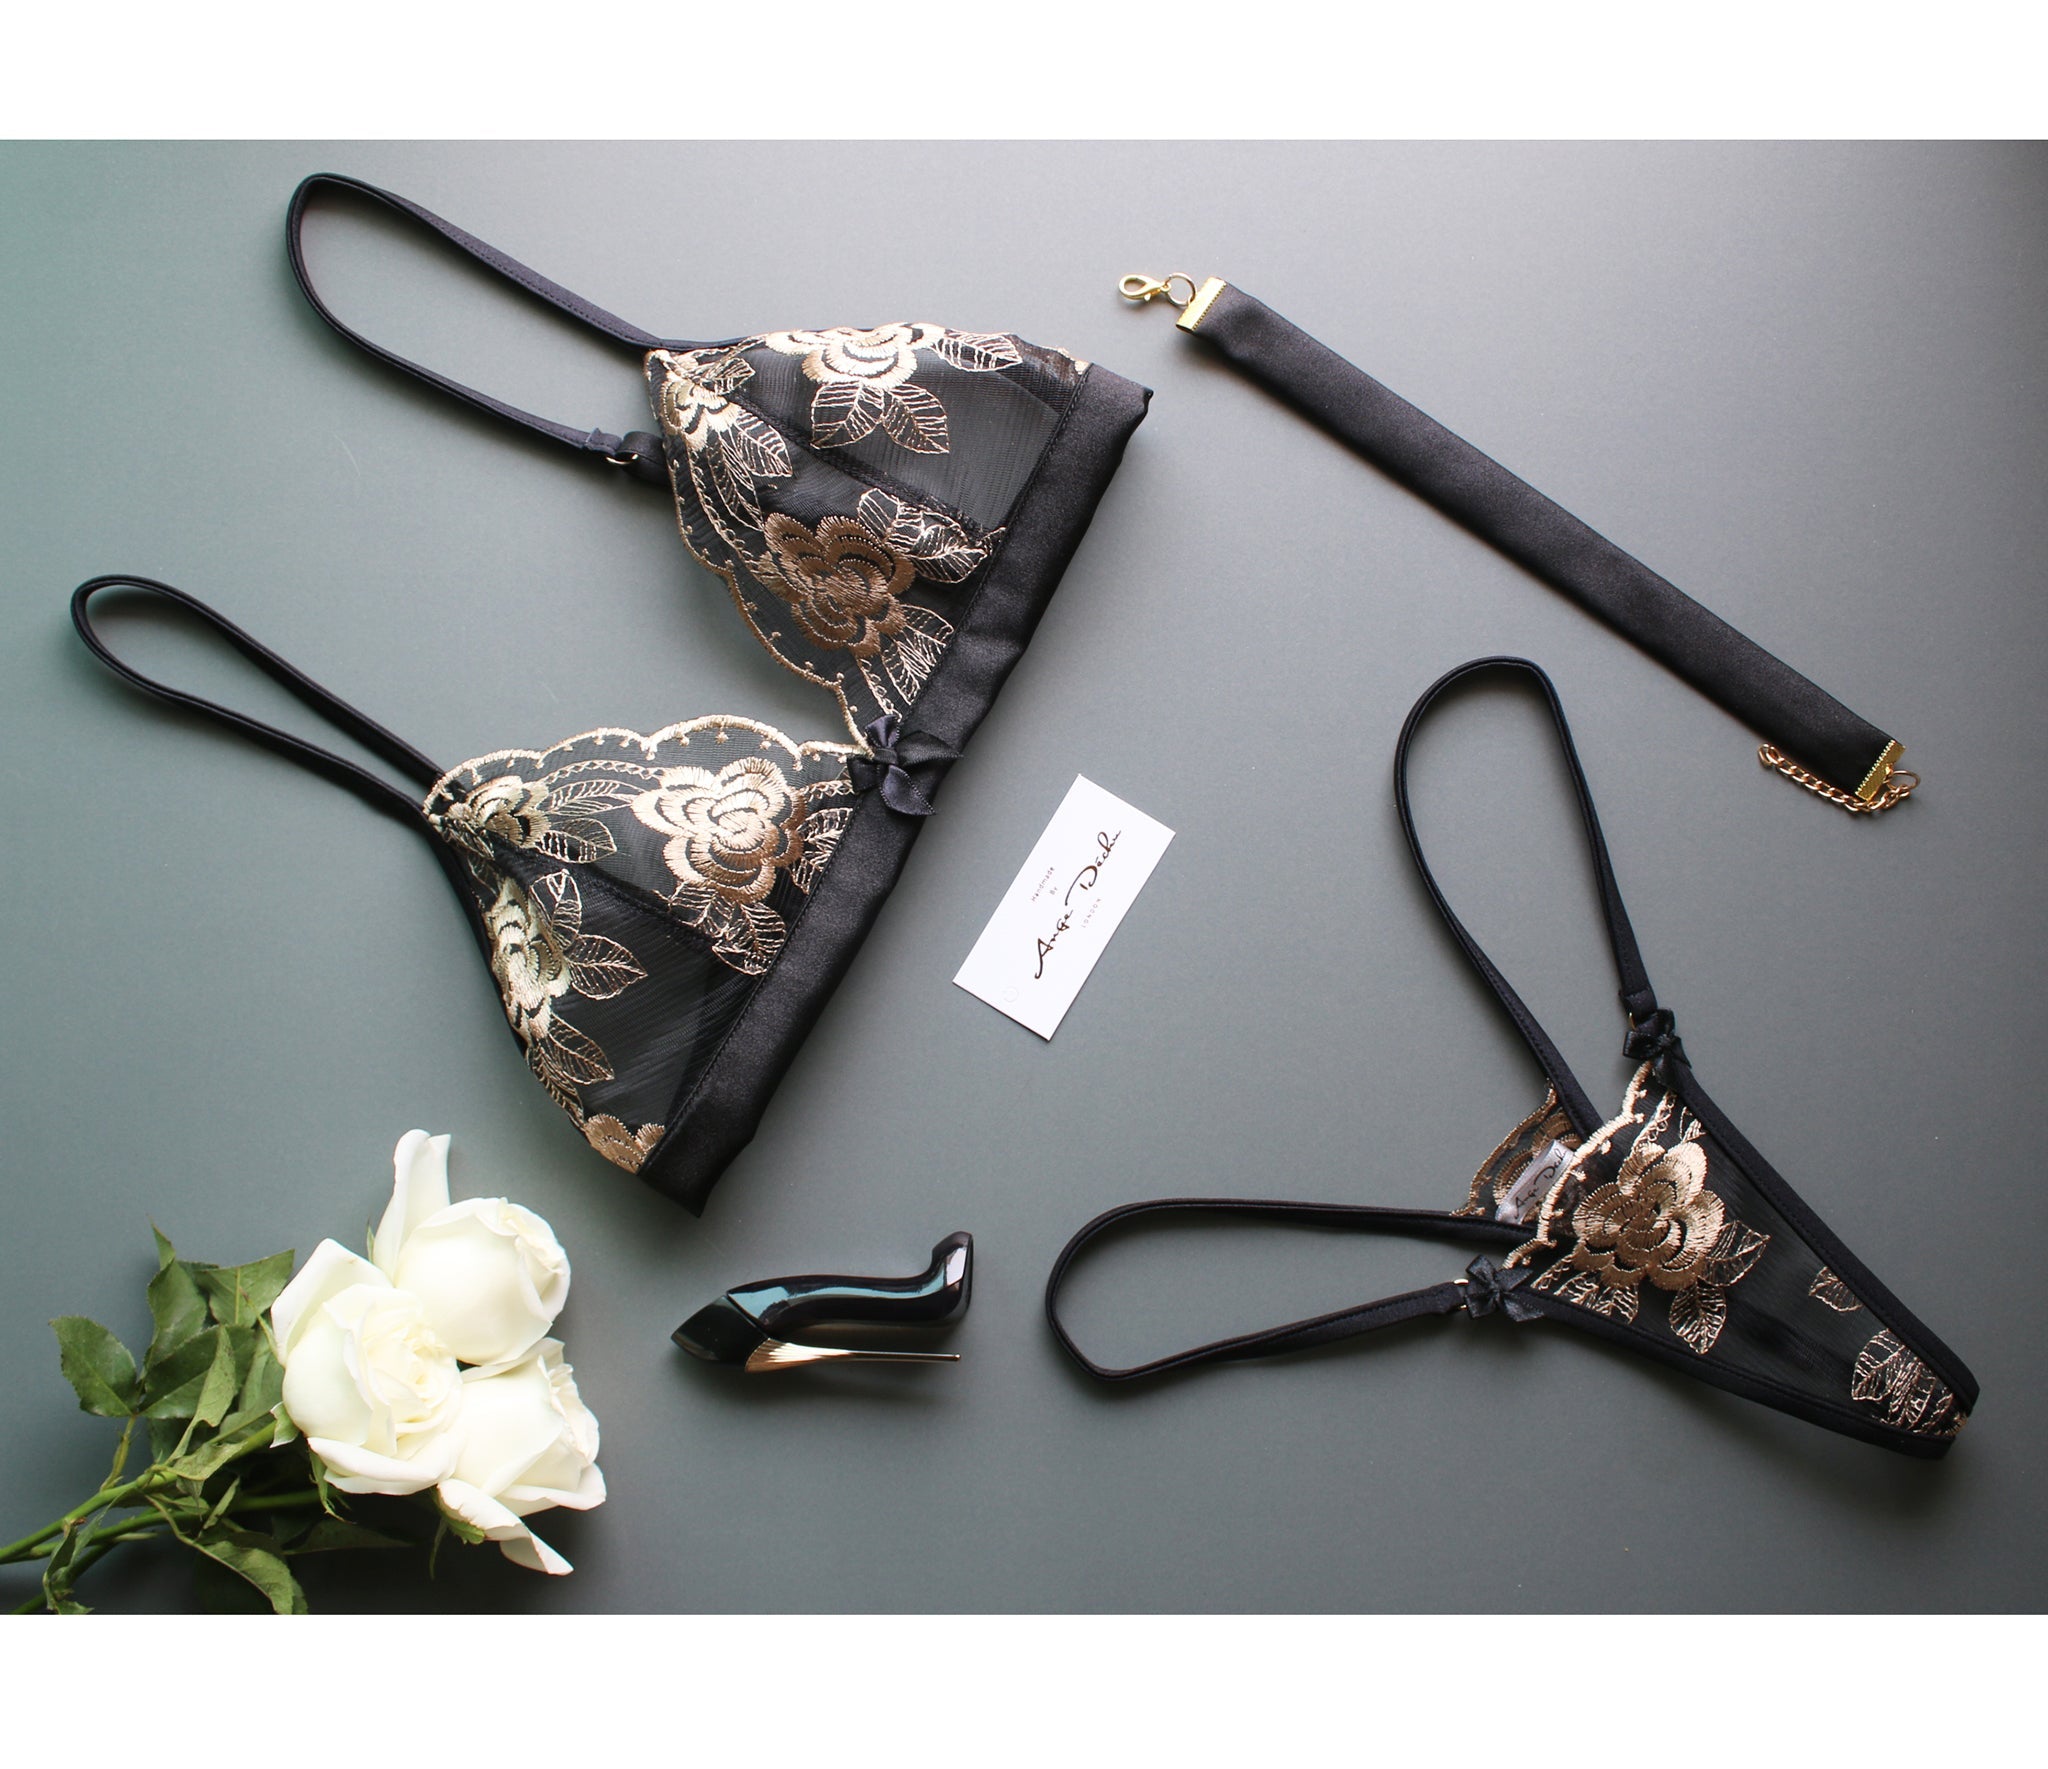 See through lingerie set with G string panties in black and gold lace with black trim sexy sheer boudoir lingerie - Ange Déchu